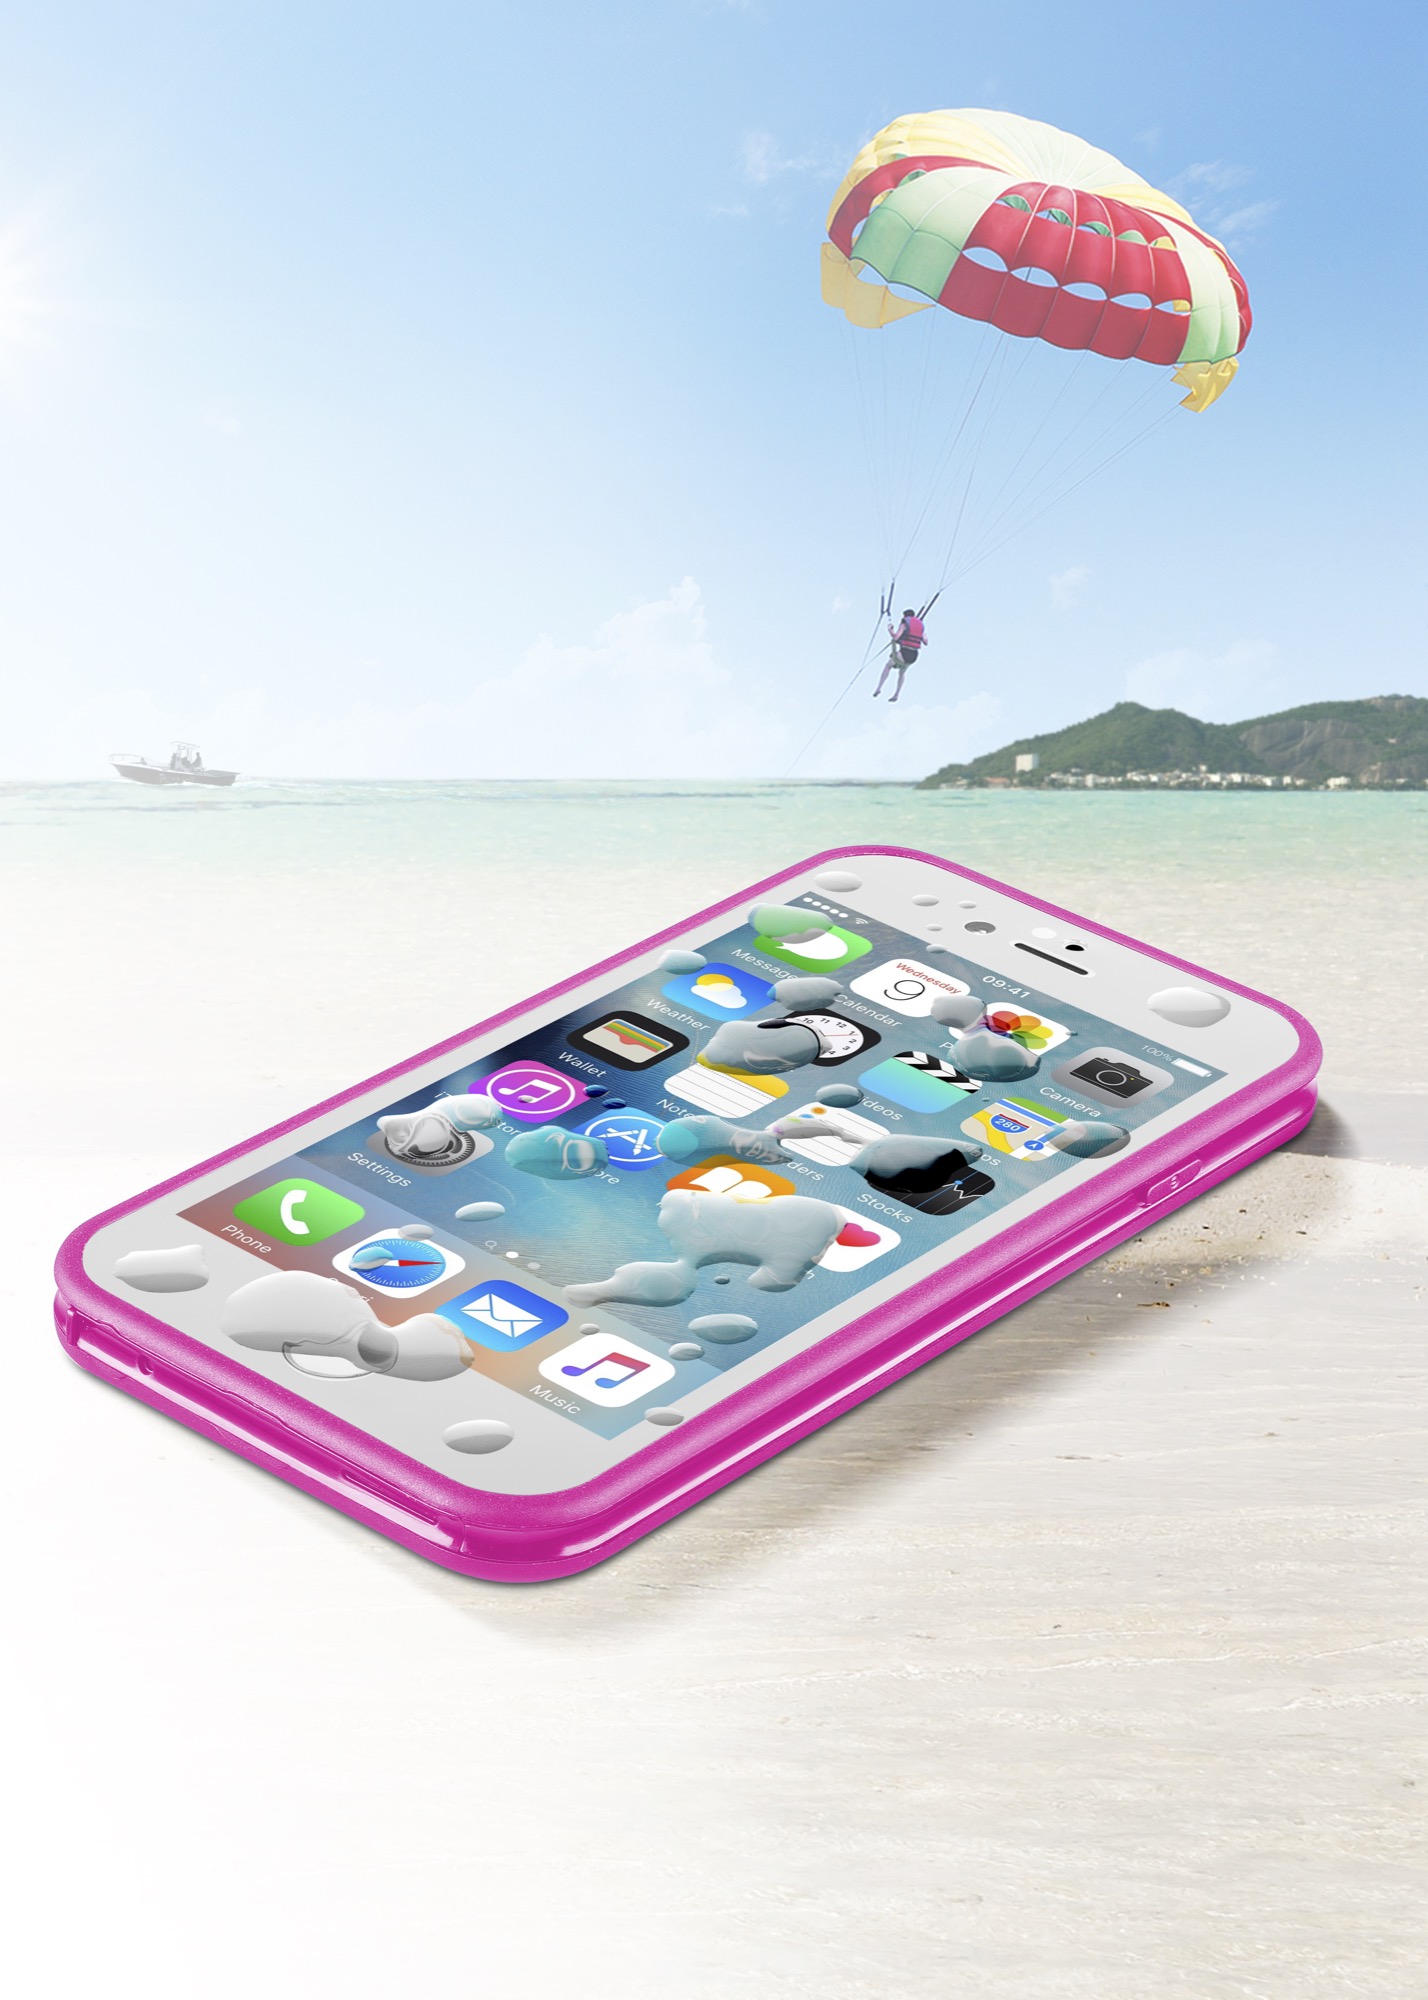 Voyager compact, iPhone 6, waterproof IPx6, pink